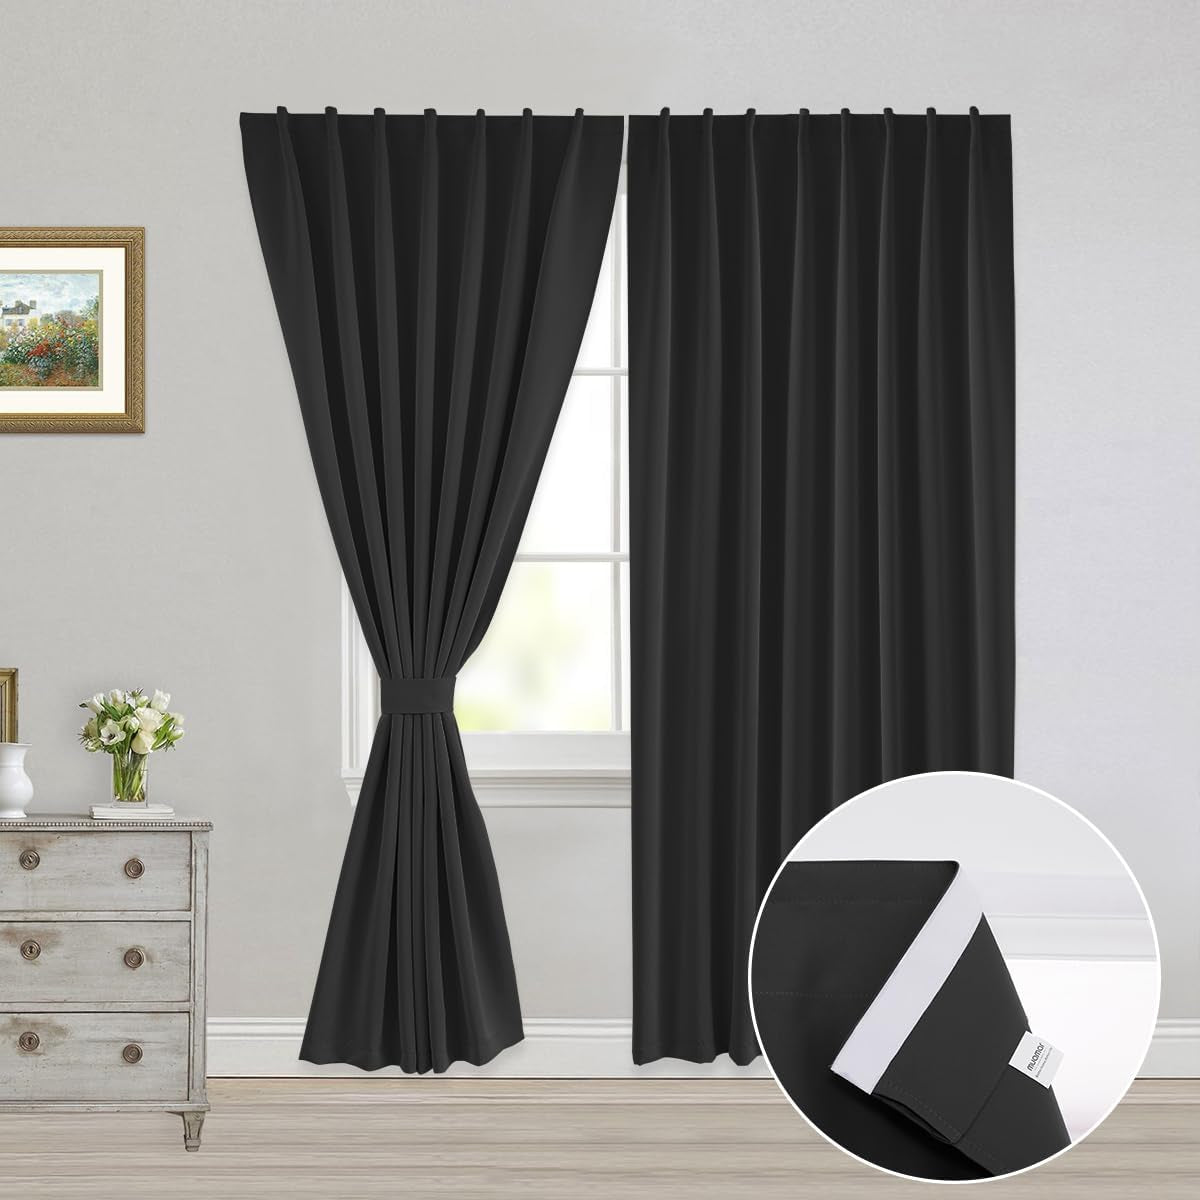 Muamar 2Pcs Blackout Curtains Privacy Curtains 63 Inch Length Window Curtains,Easy Install Thermal Insulated Window Shades,Stick Curtains No Rods, Black 42" W X 63" L  Muamar Black 52"W X 84"L 